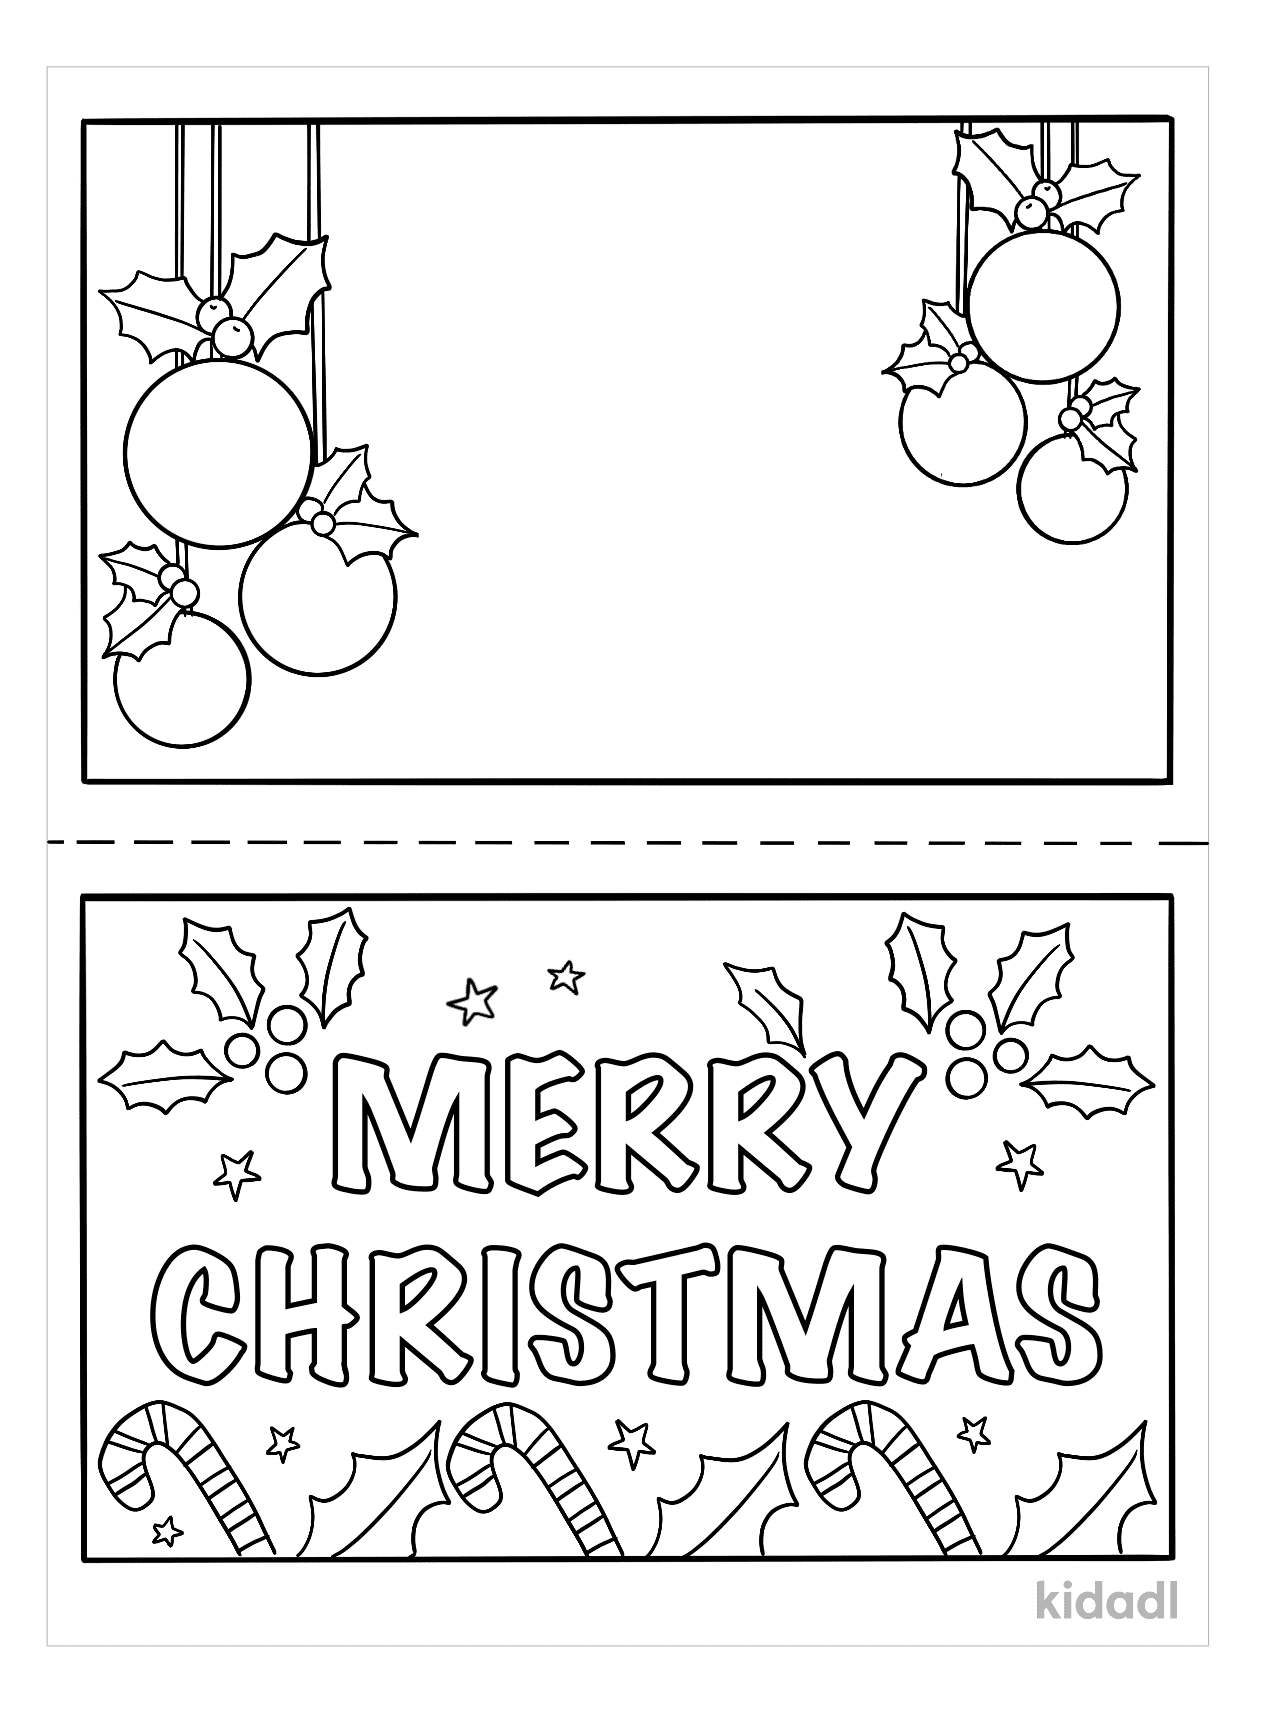 Lovely Merry Christmas Card Coloring Pages